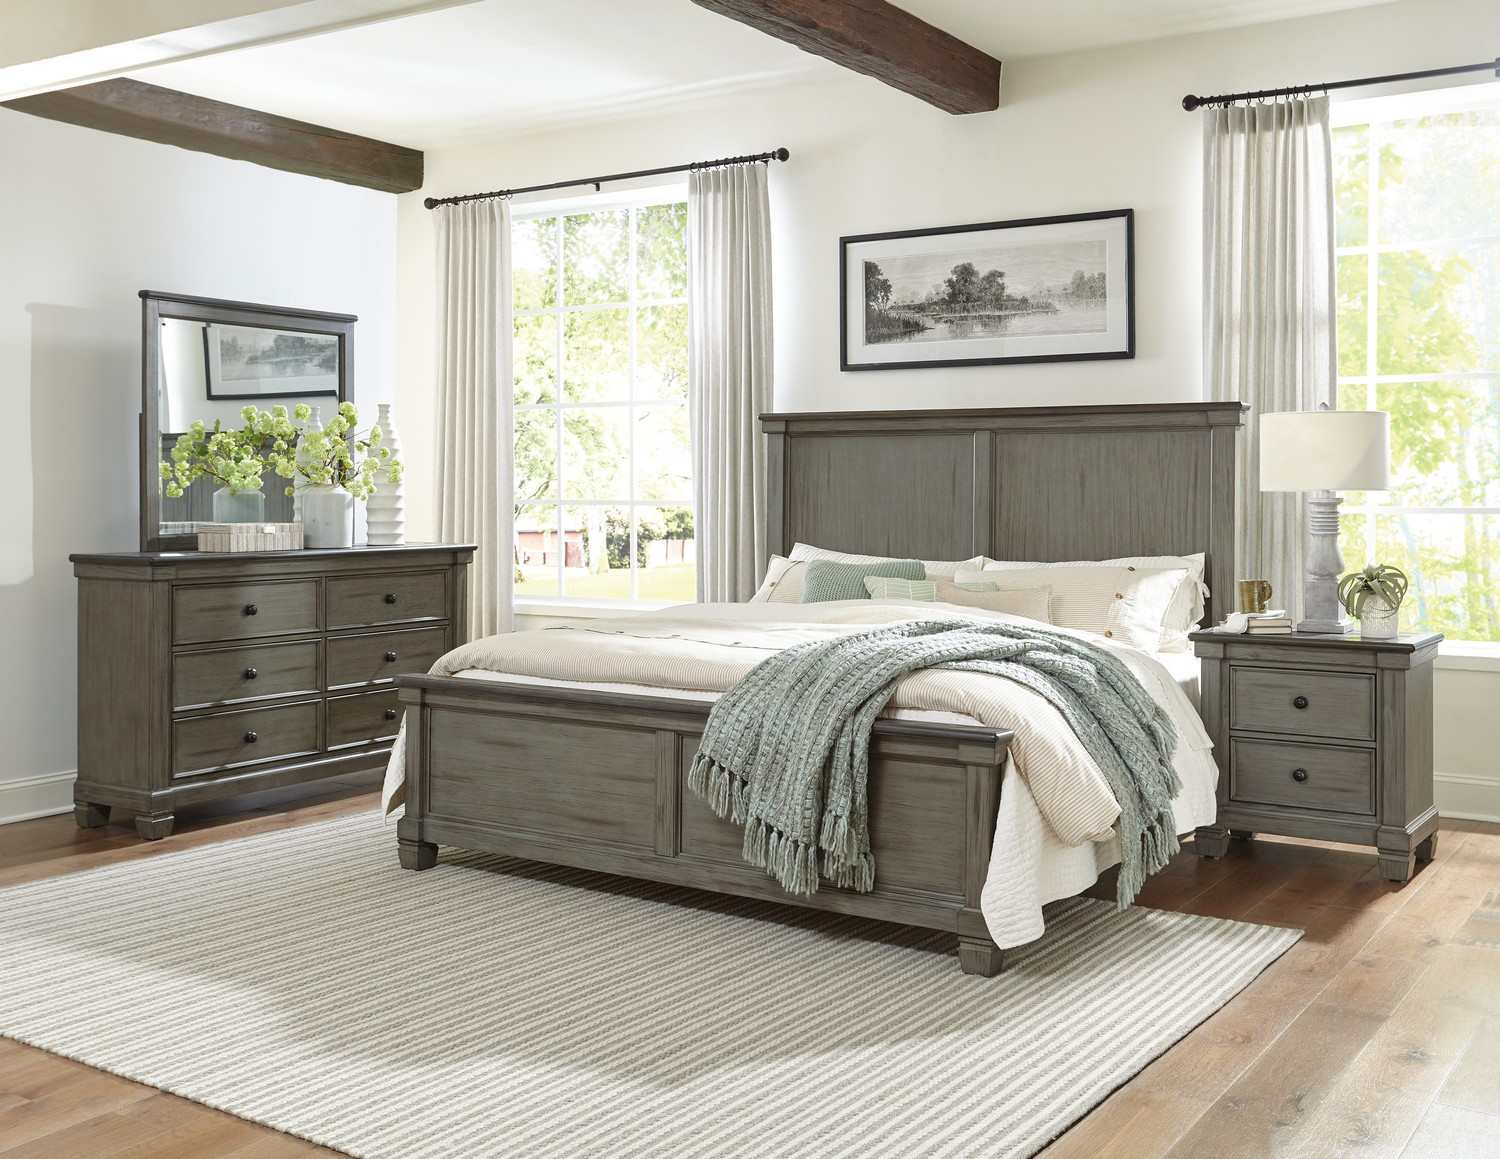 Homelegance Weaver Bedroom Set - Two-tone : Antique Gray And Coffee